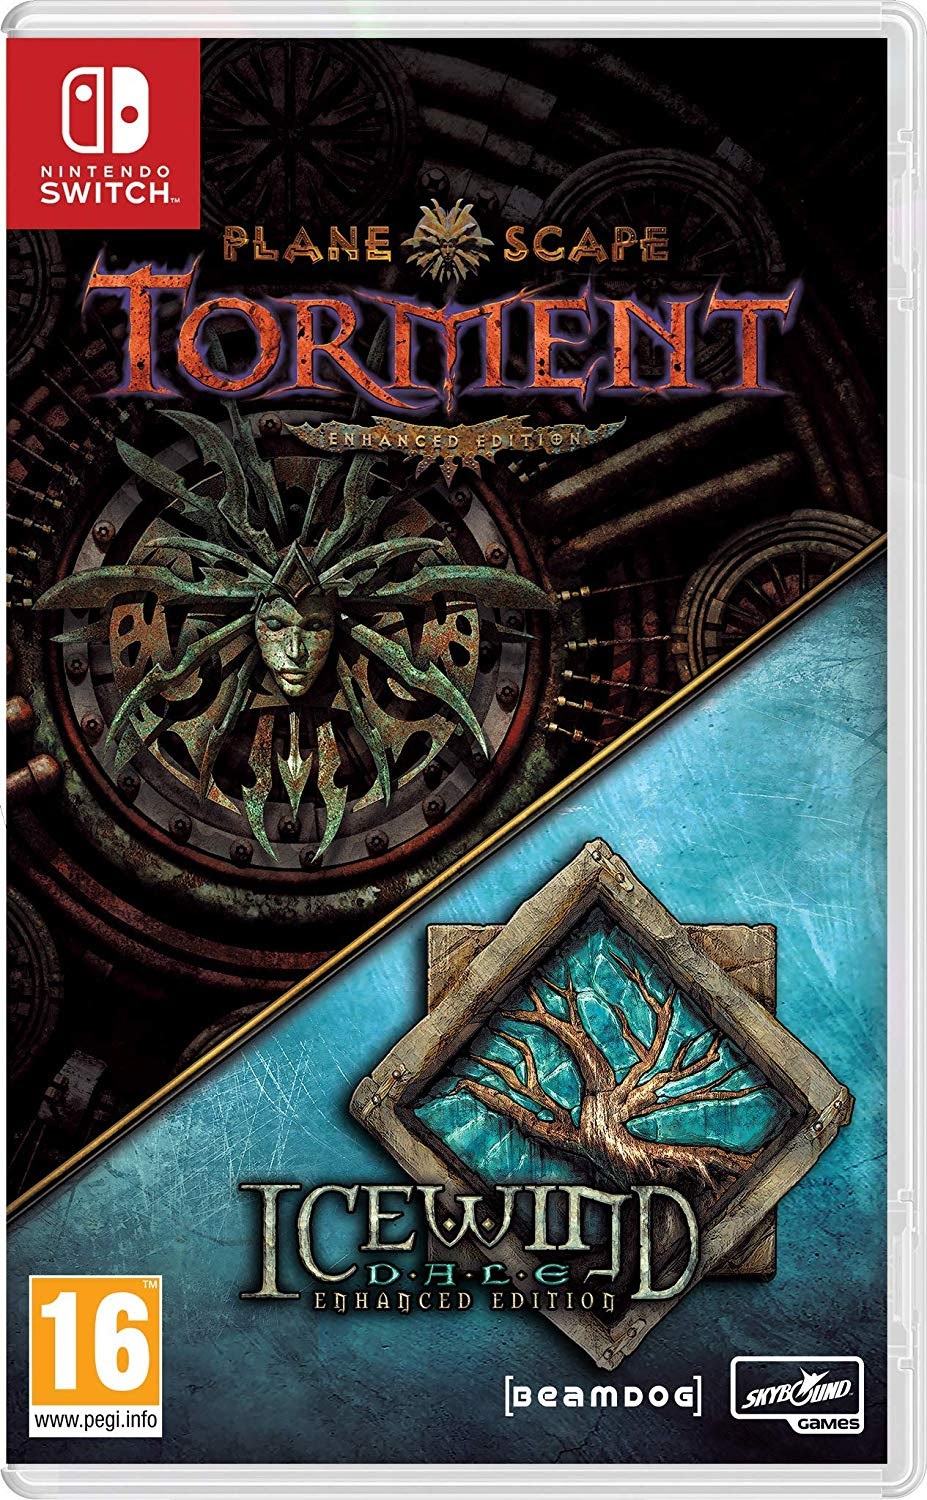 Planescape Torment + Icewind Dale Enhanced Edition